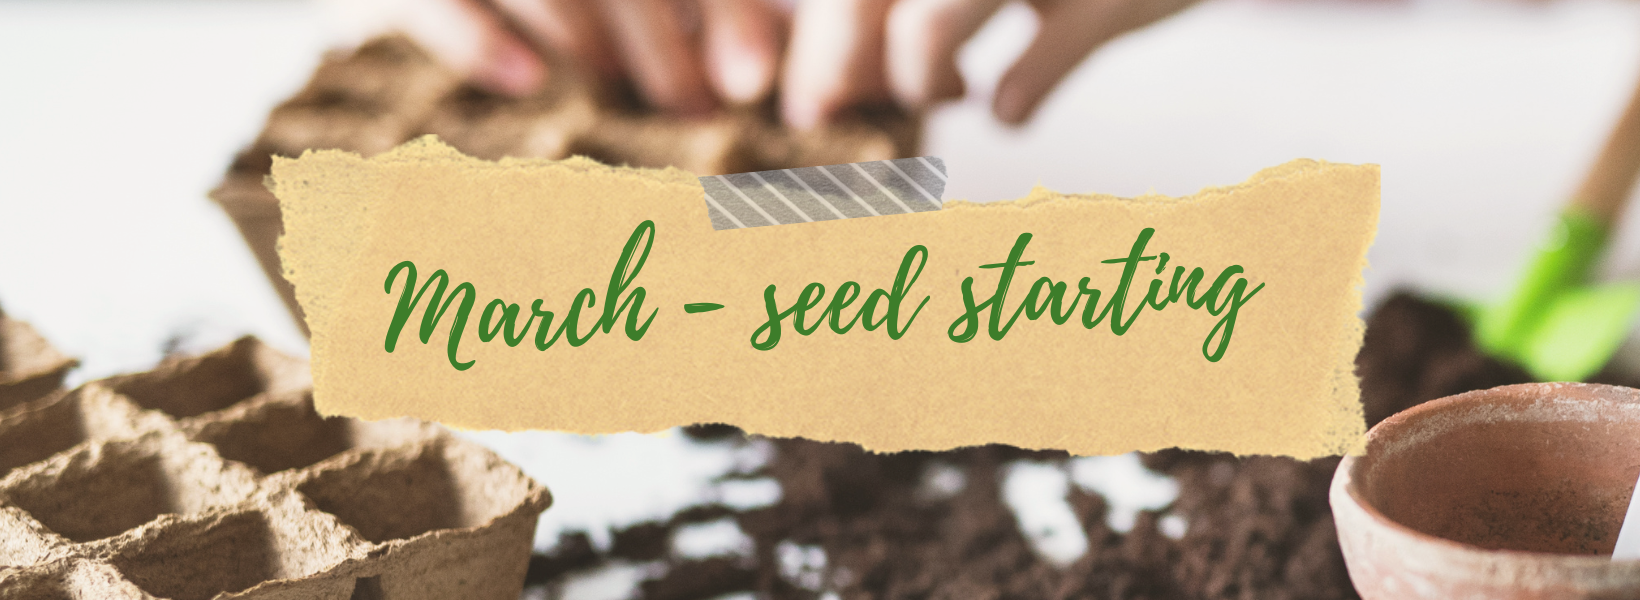 March - seed starting